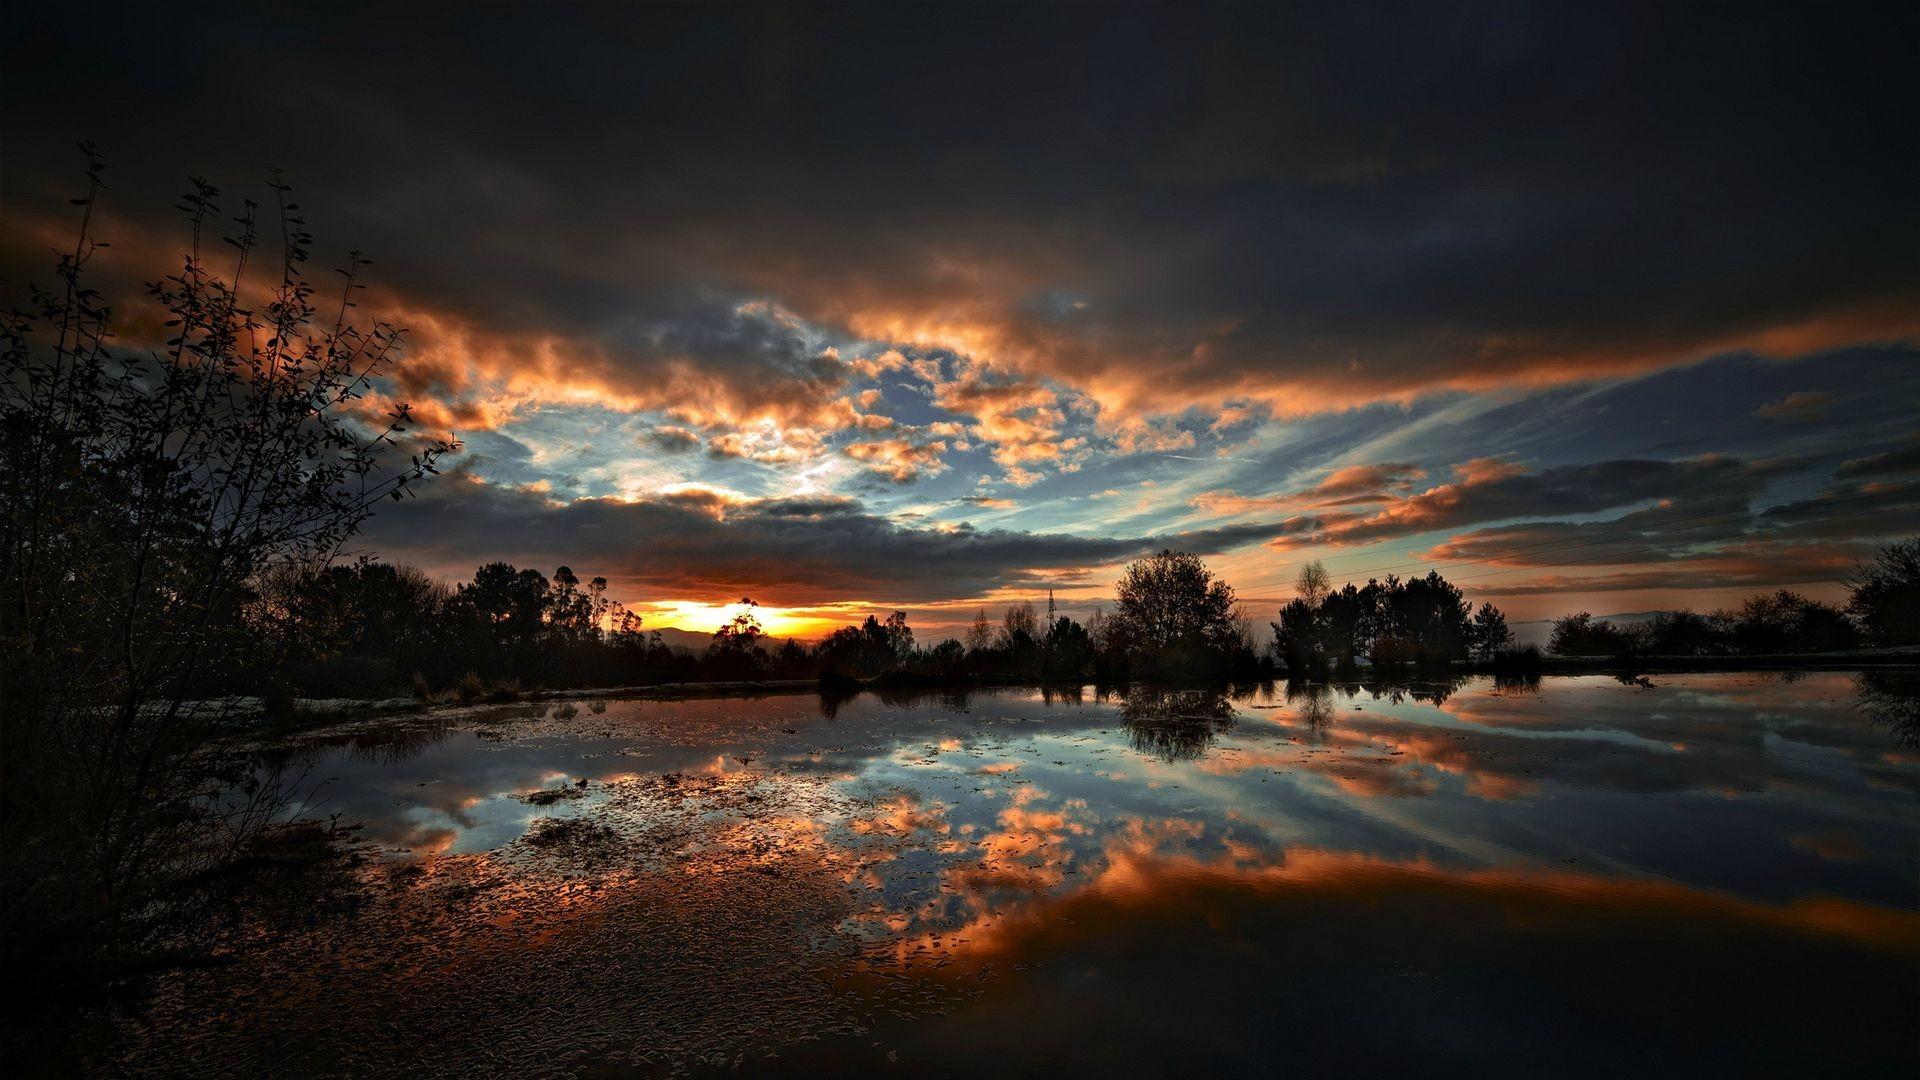 #trees, #HDR, #sunset, #clouds, #nature, #reflection, #lake